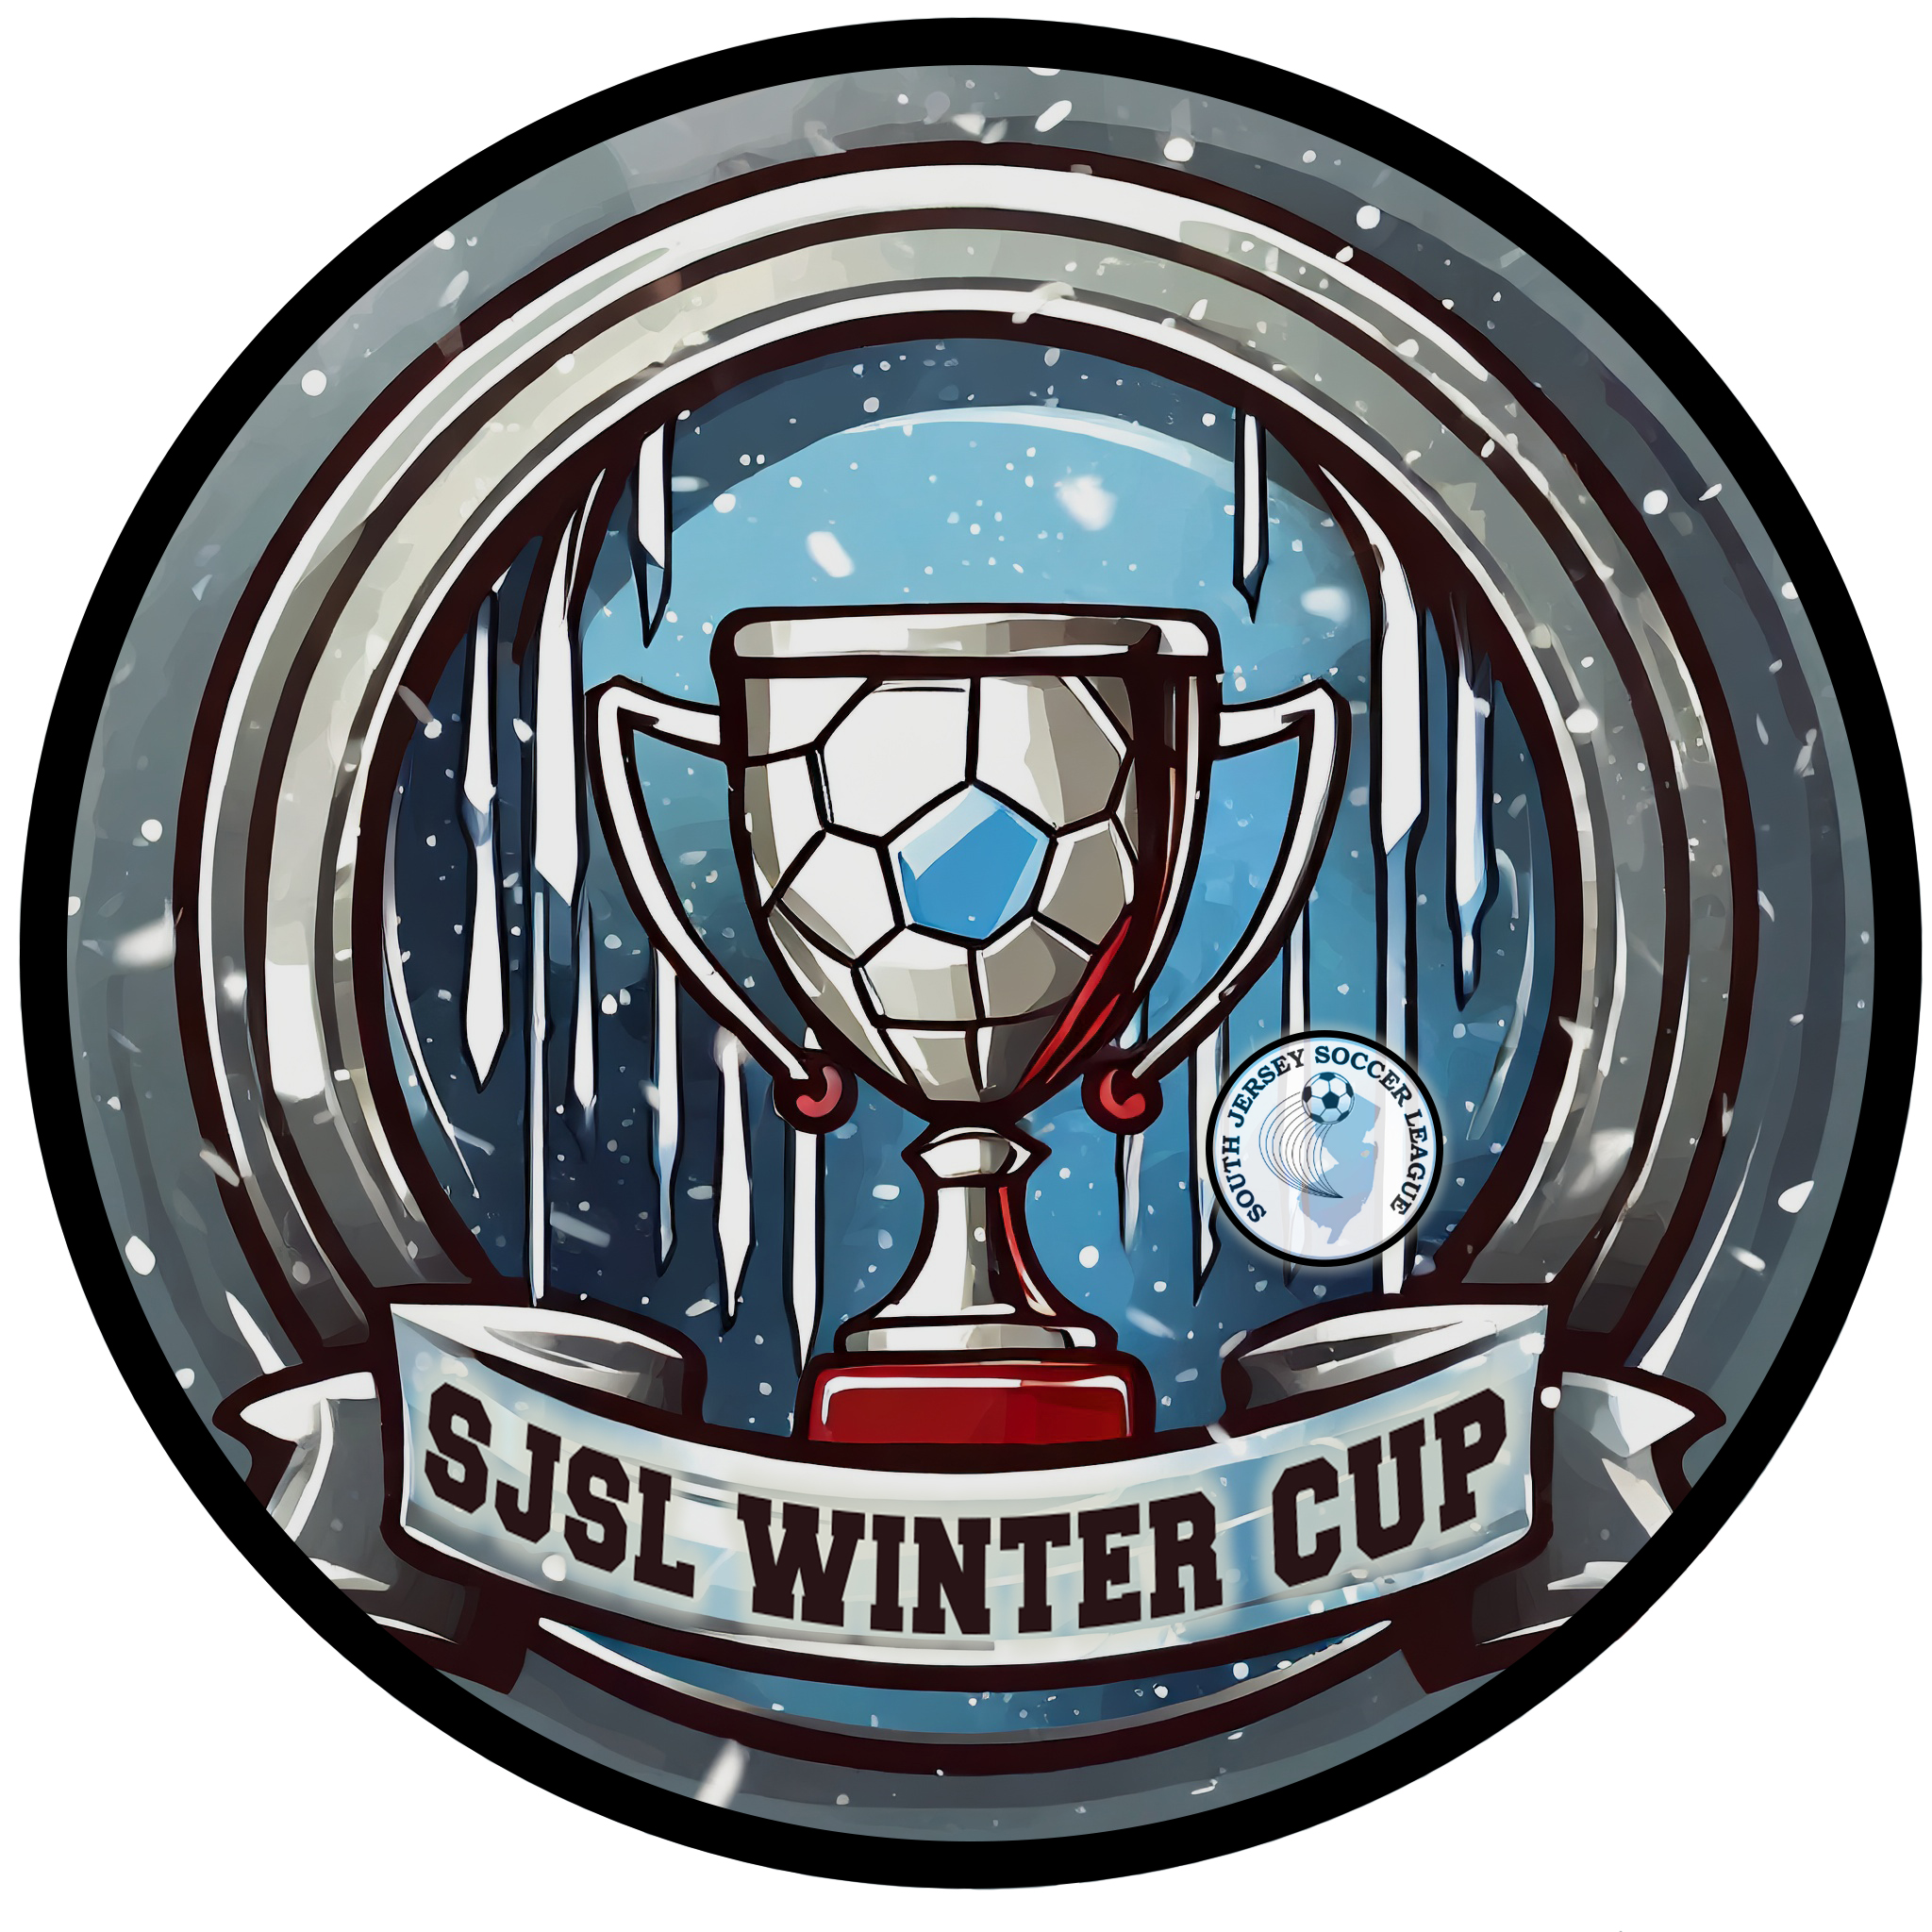 The South Jersey Soccer League is proud to host our annual SJSL Winter Cup!  Scheduled for 2/23/24, 2/24/24 and 2/25/24, Open to Boys and Girls Teams in South Jersey.  Register Now!

$150 Registration Fee, Teams pay Referee Fees